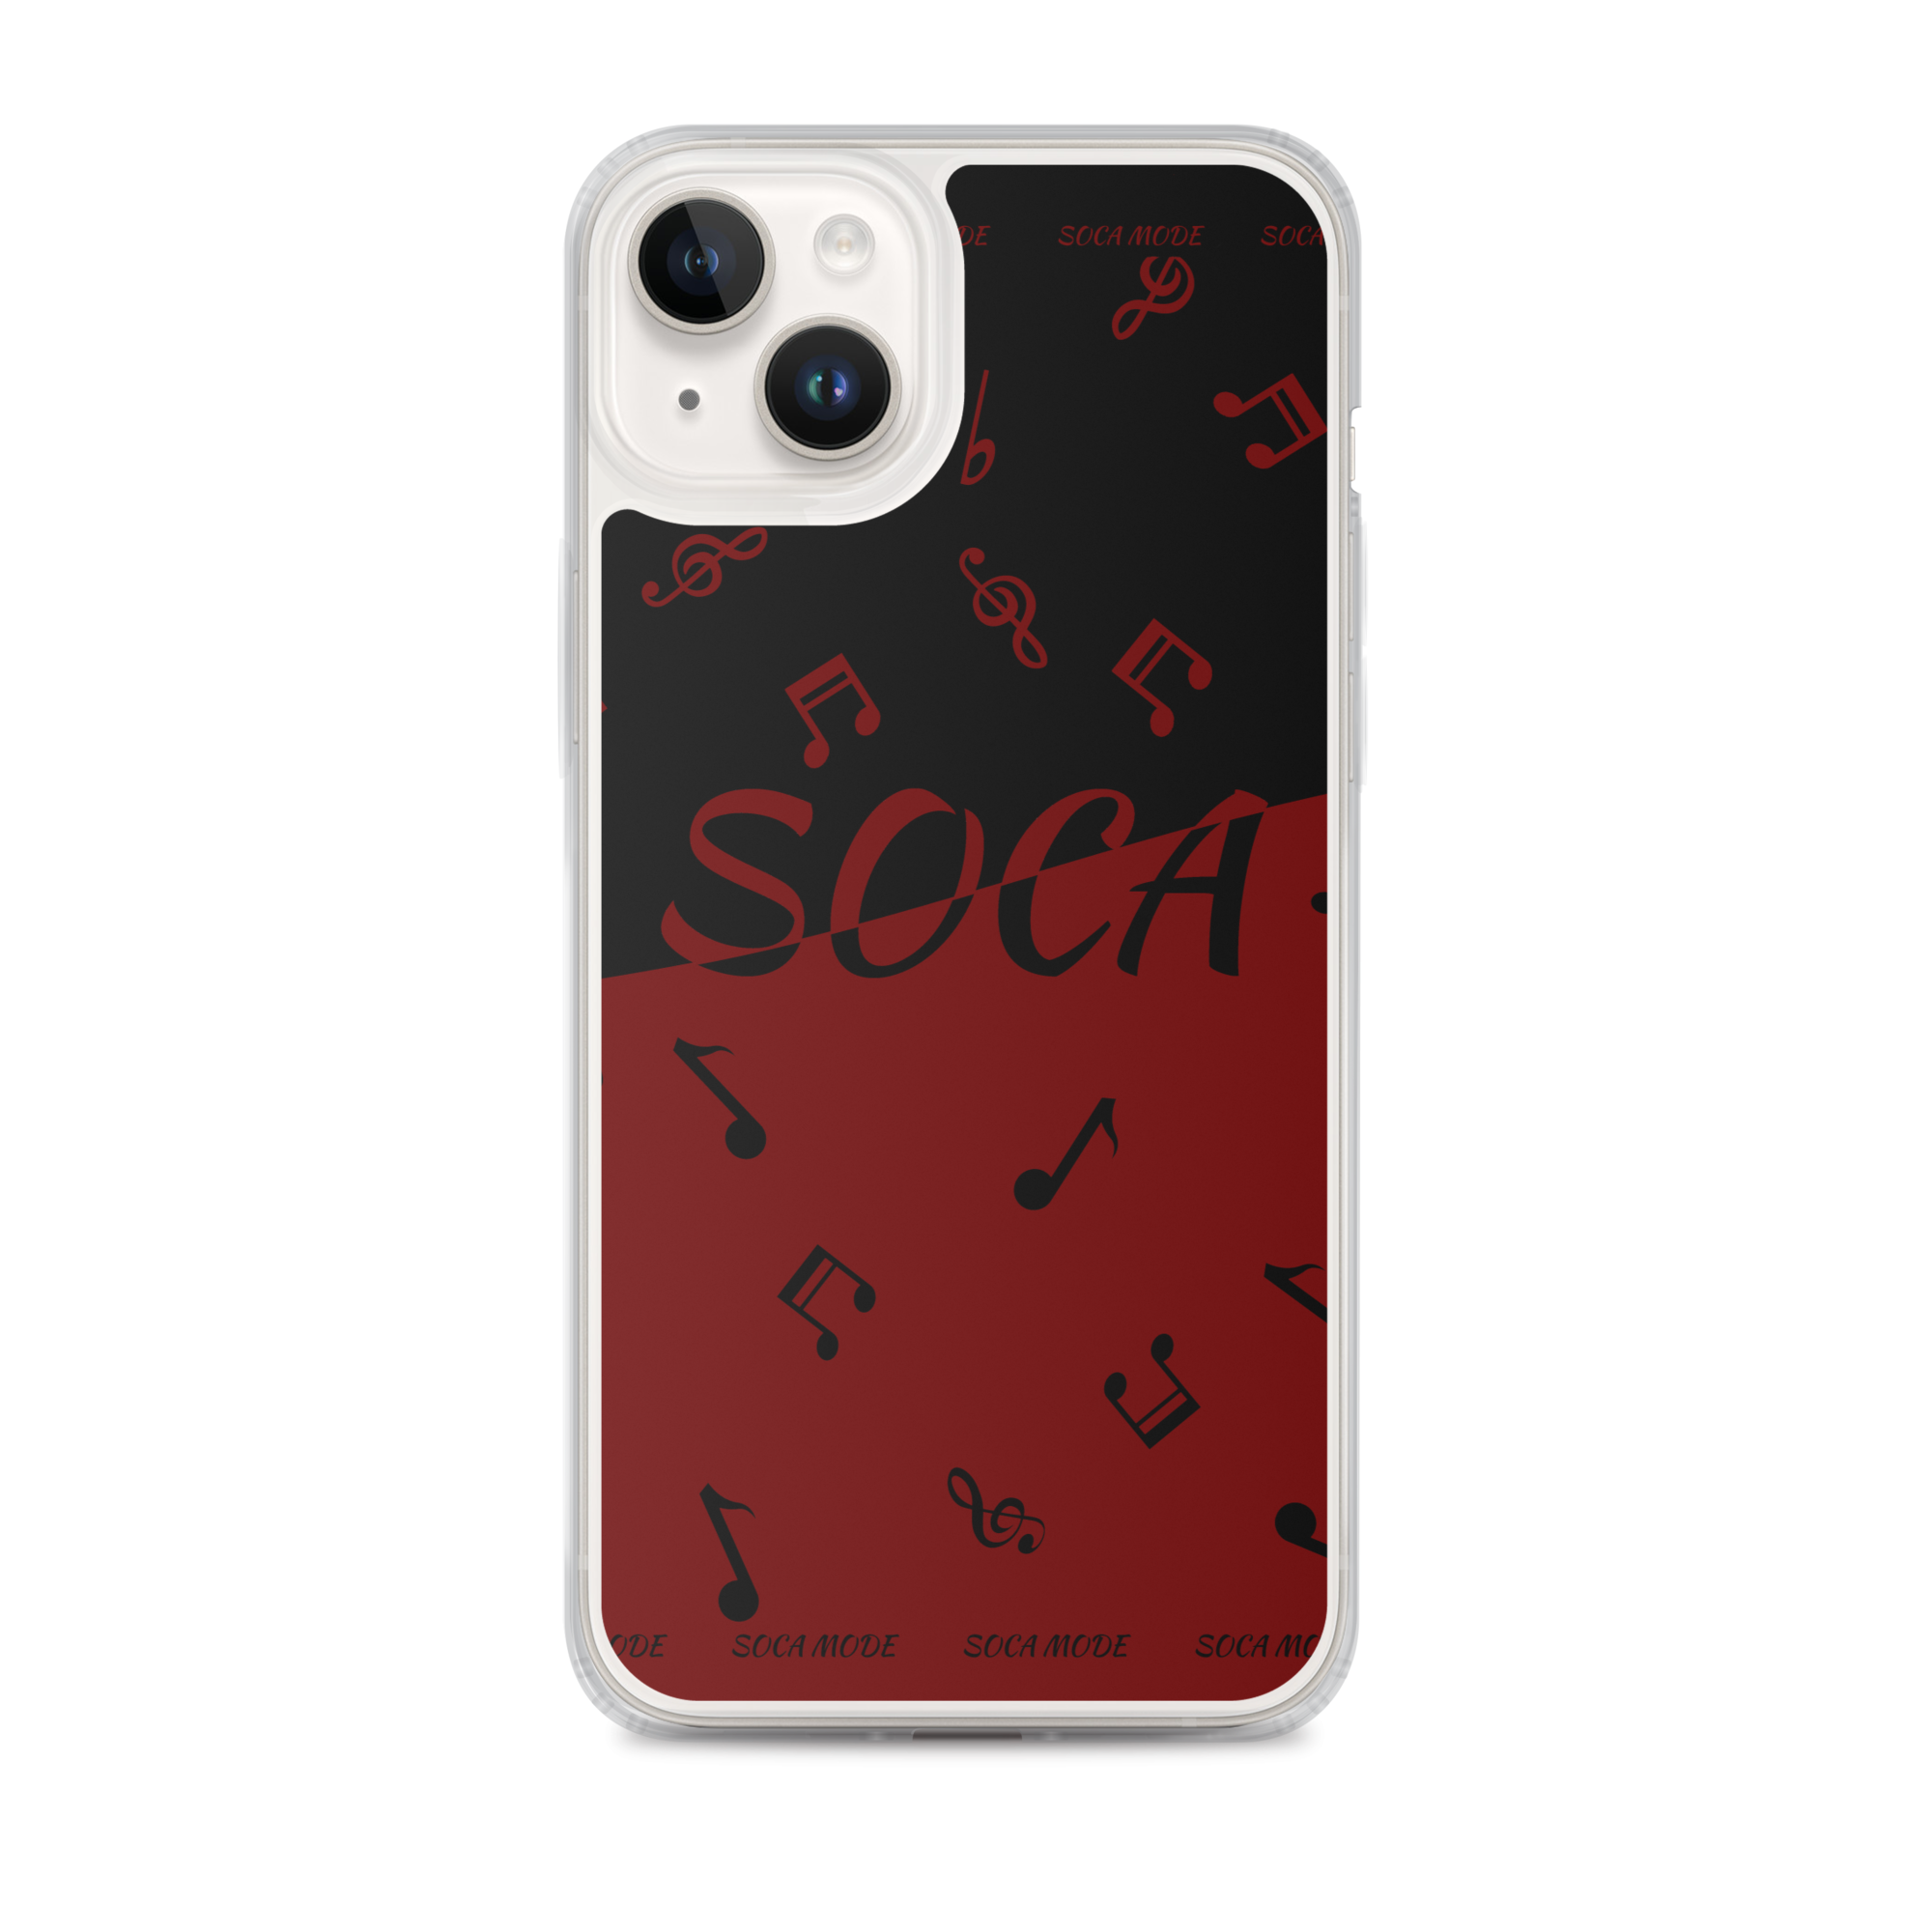 iPhone 11 Pro back to iPhone 6 - All iPhones ( Soca in Black and Burgundy)